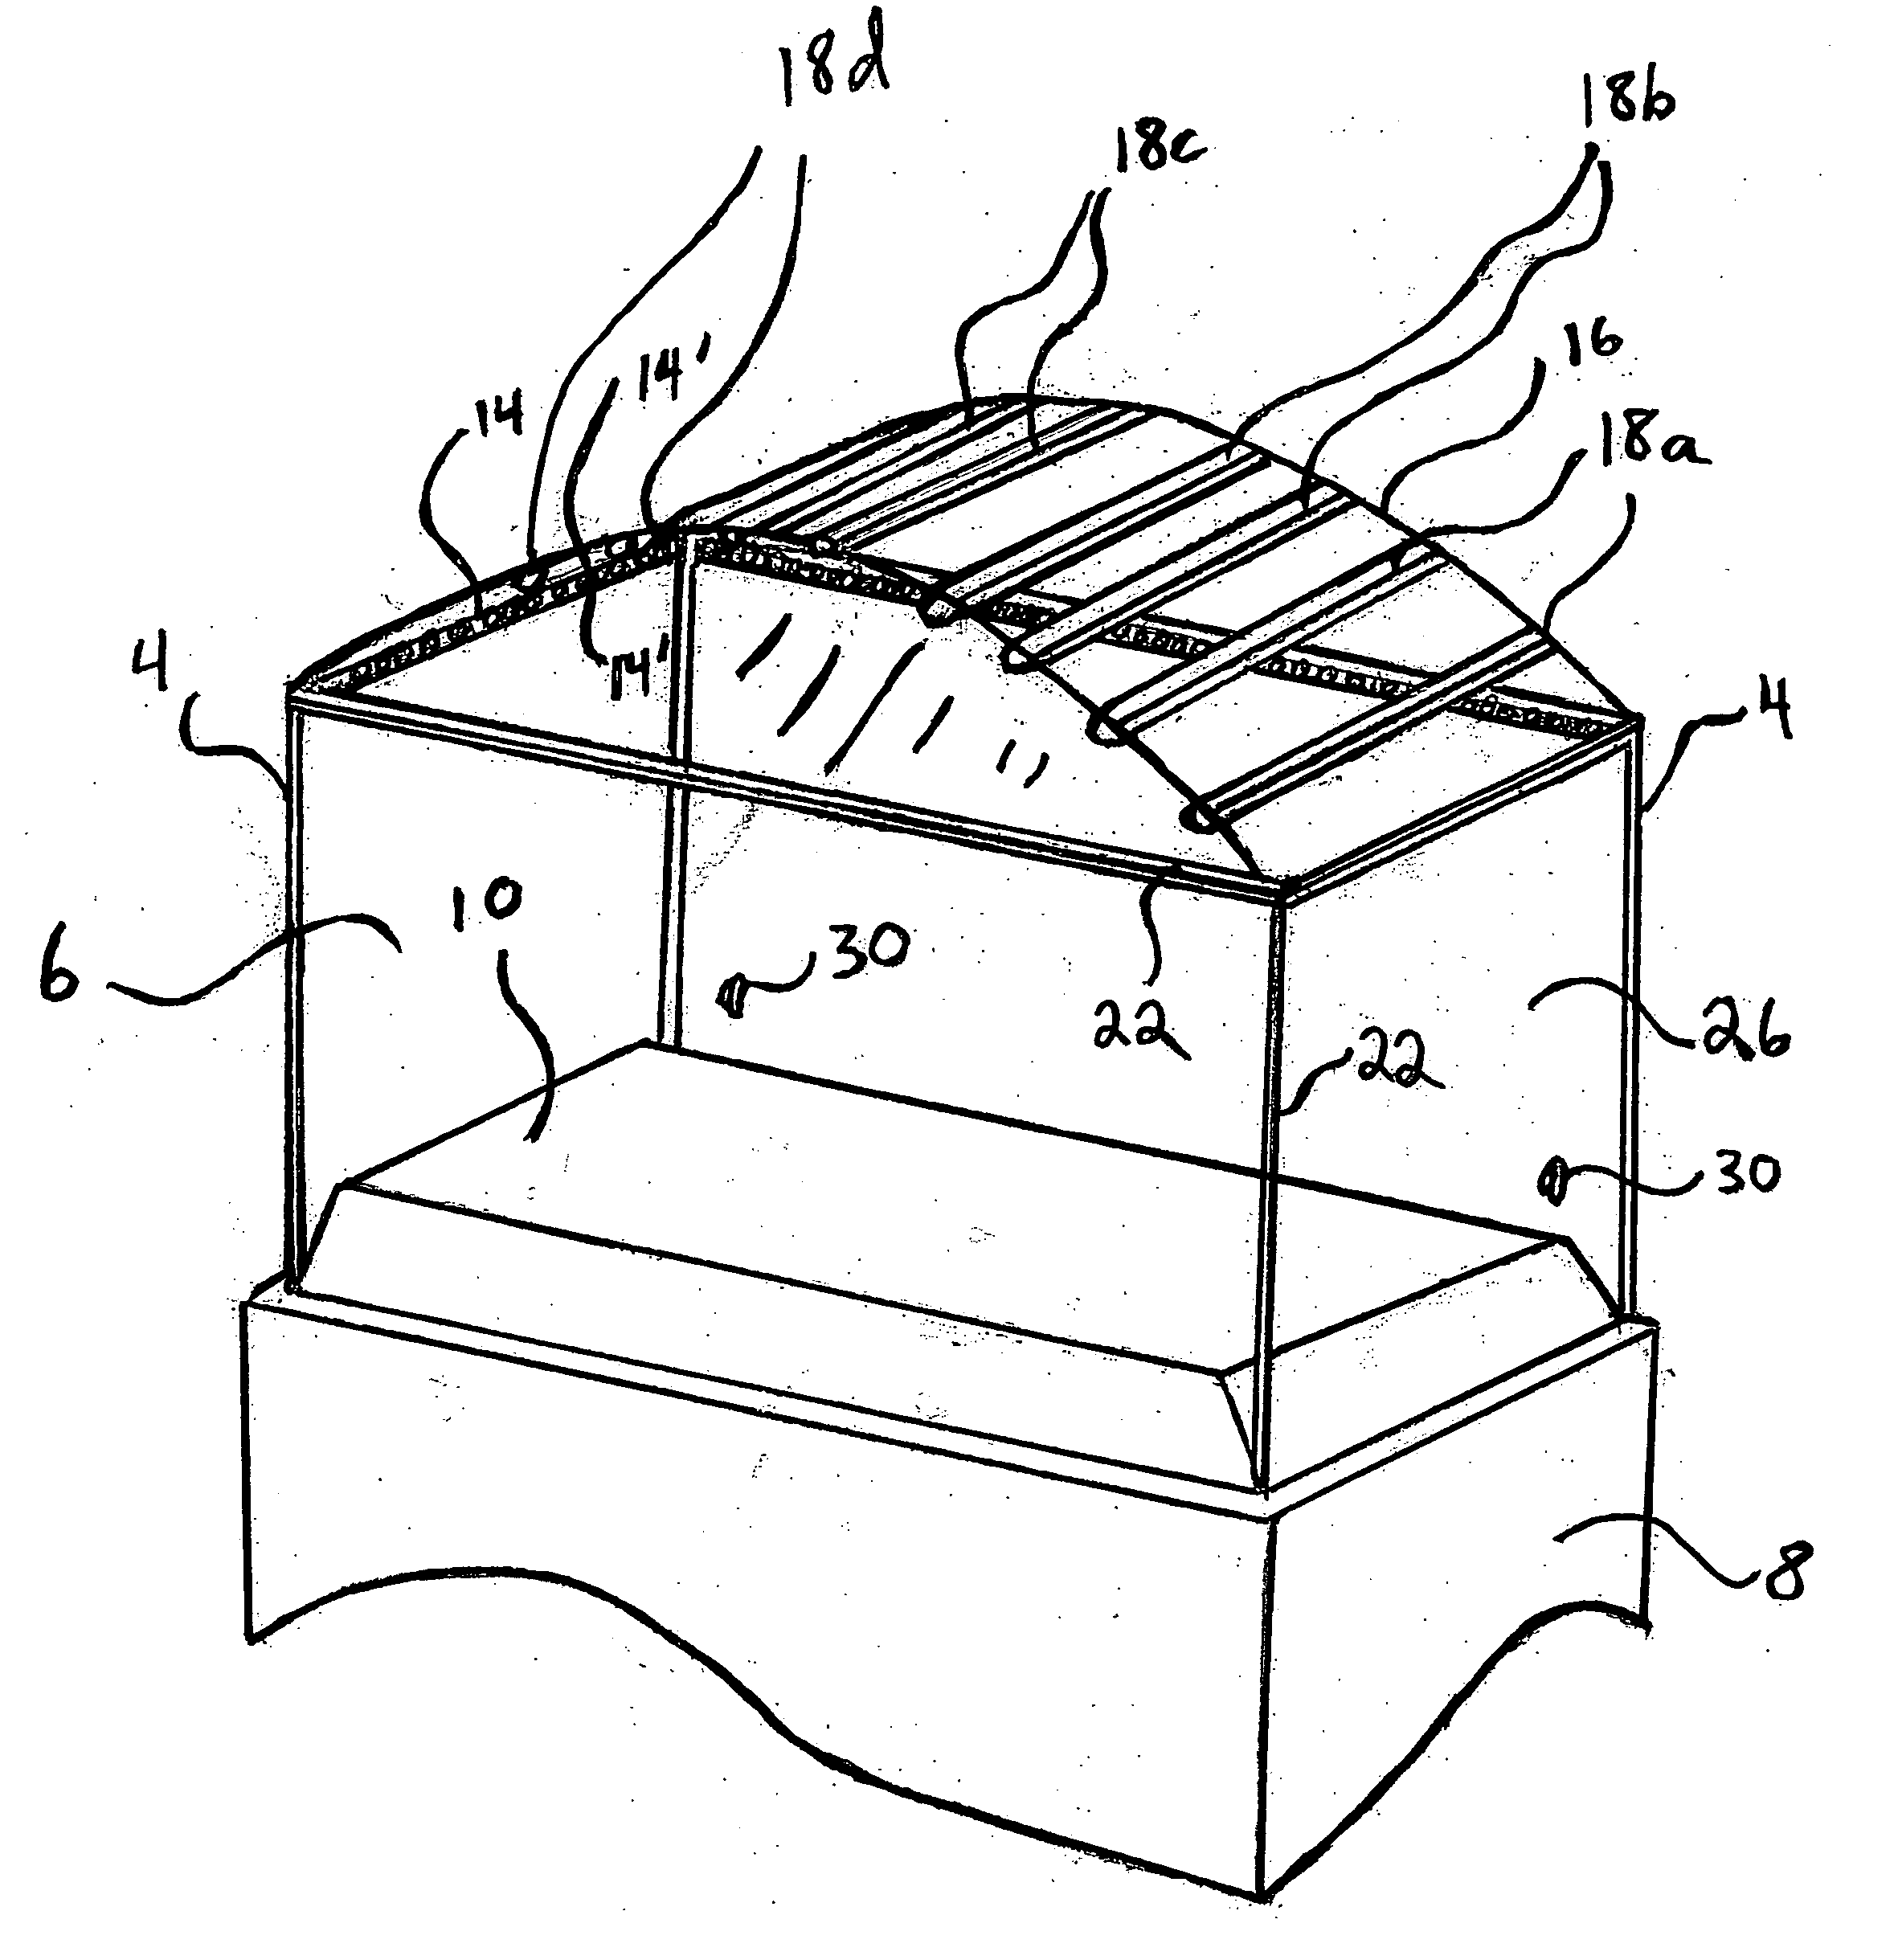 Methods, systems and apparatus for displaying bonsai trees